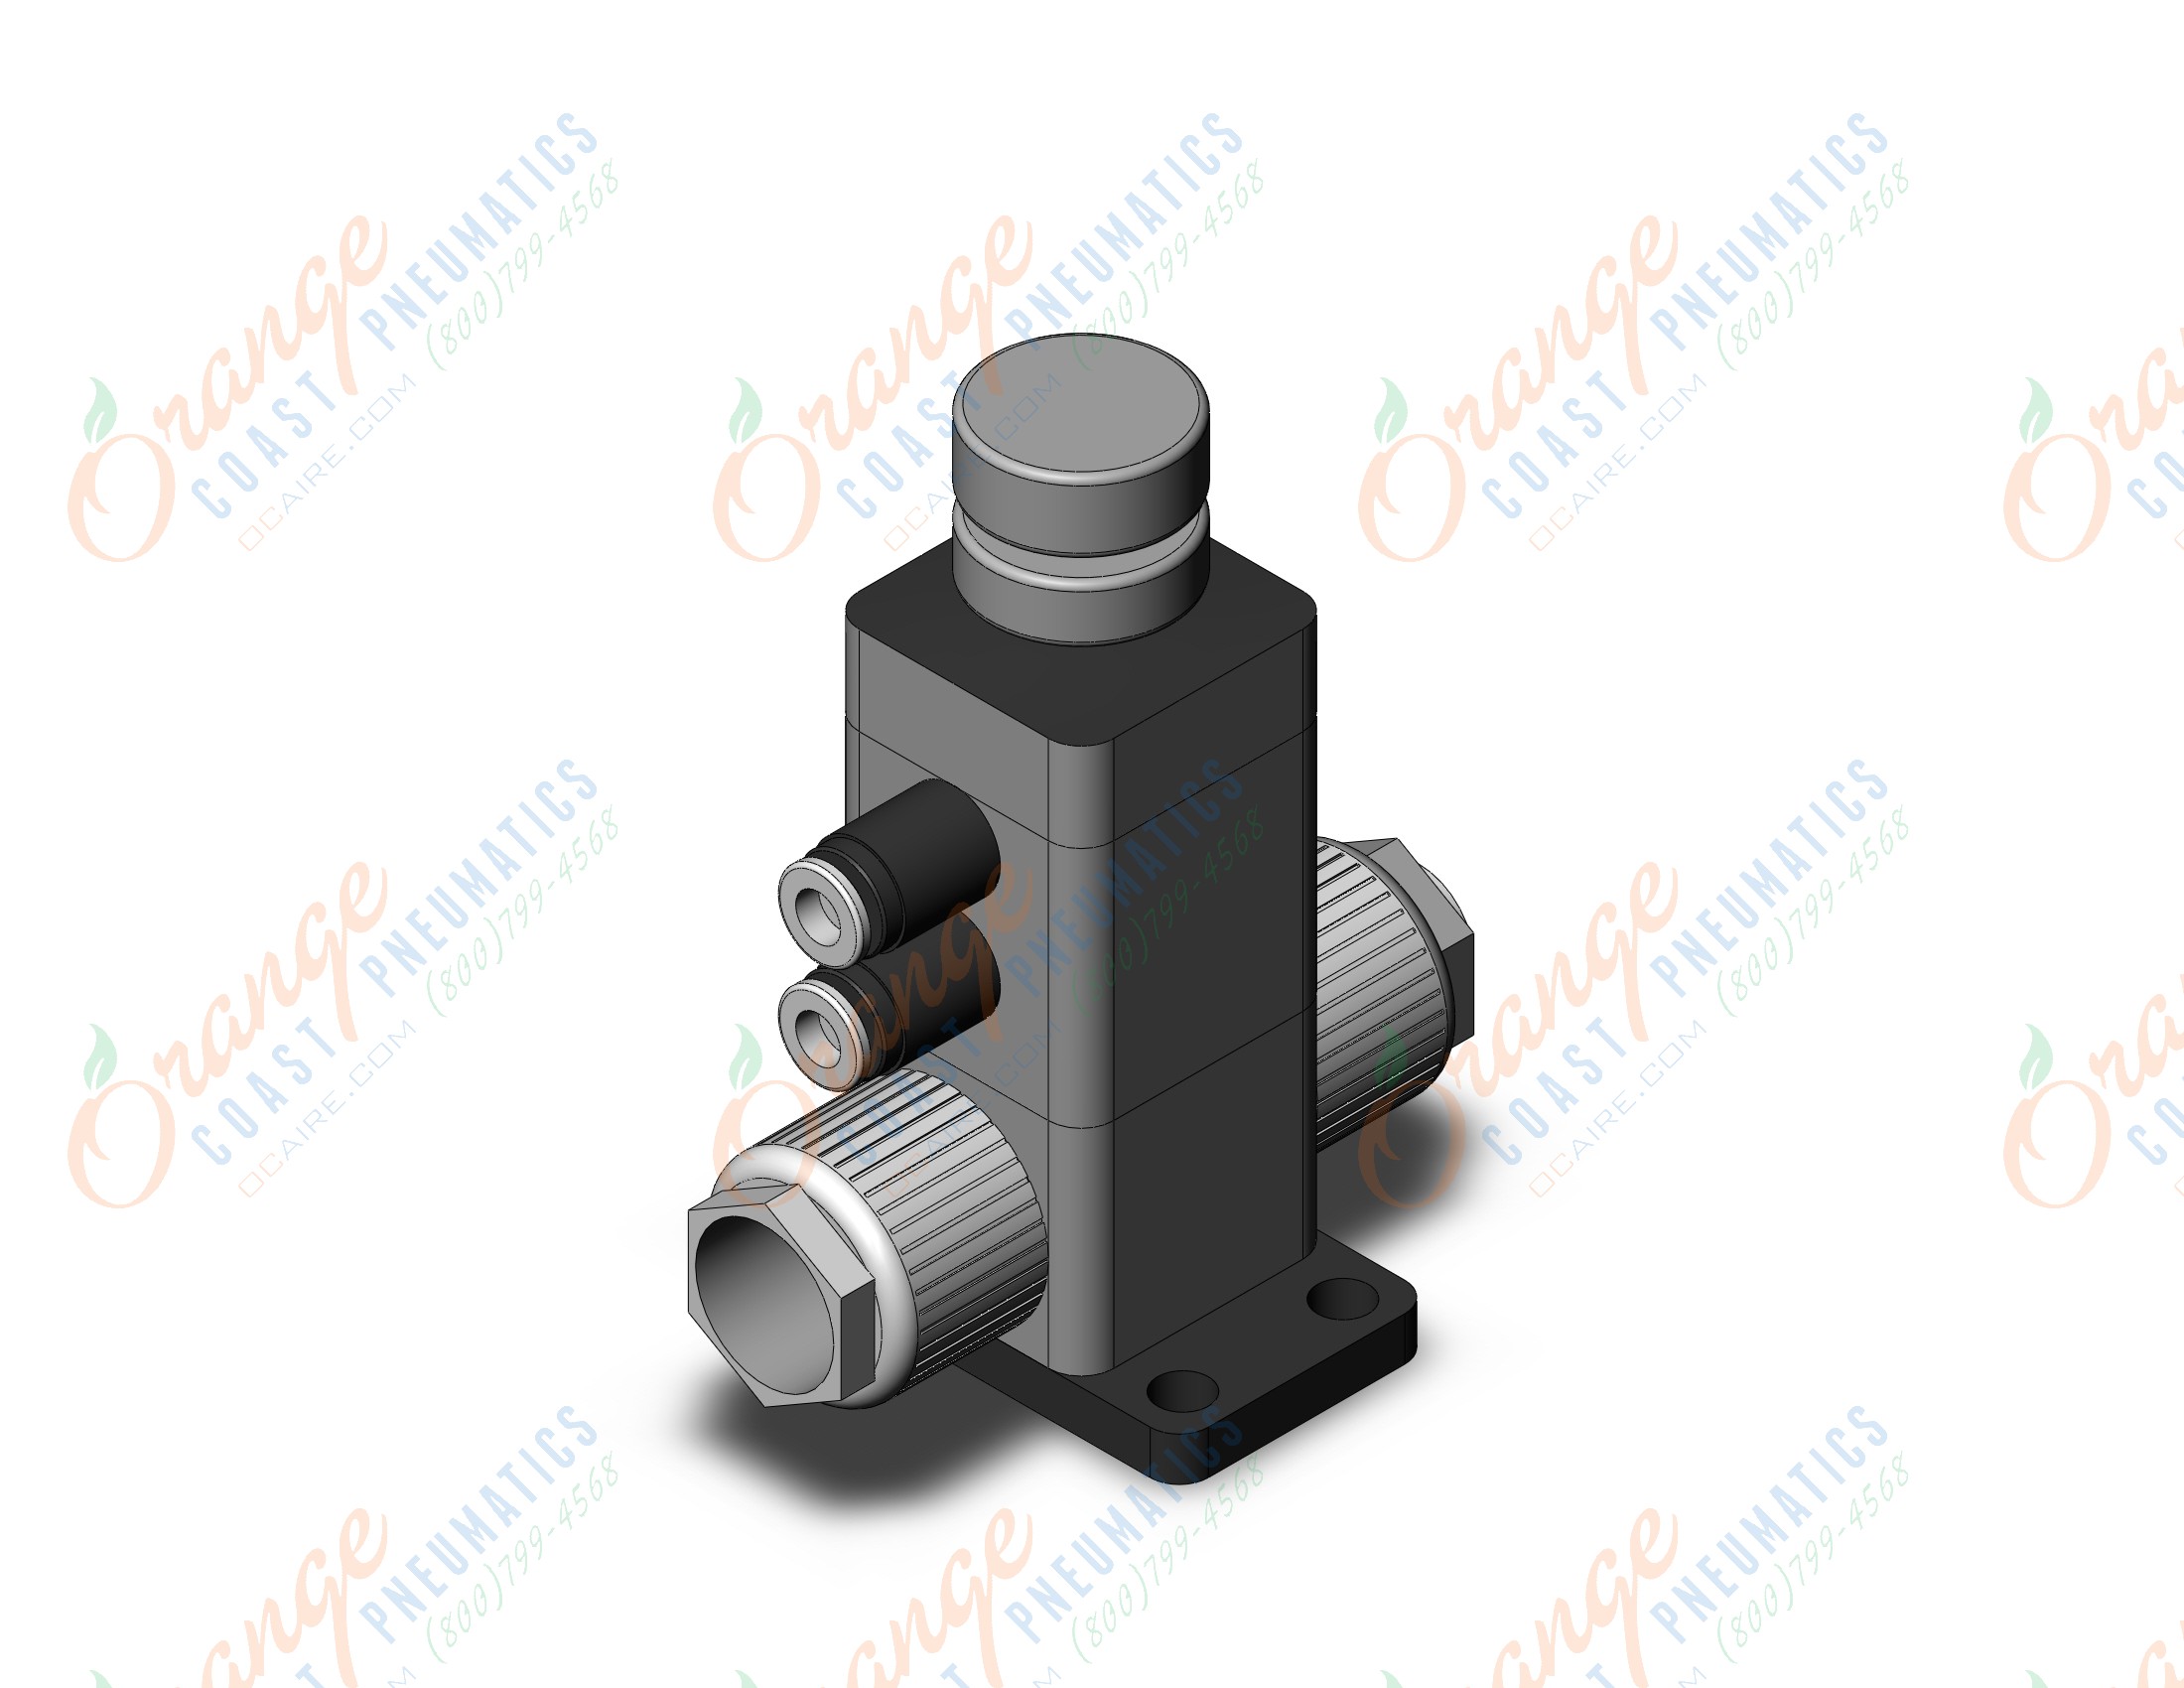 SMC LVD40-S11-1 high purity air operated chemical valve, HIGH PURITY CHEMICAL VALVE, AIR OPERATED